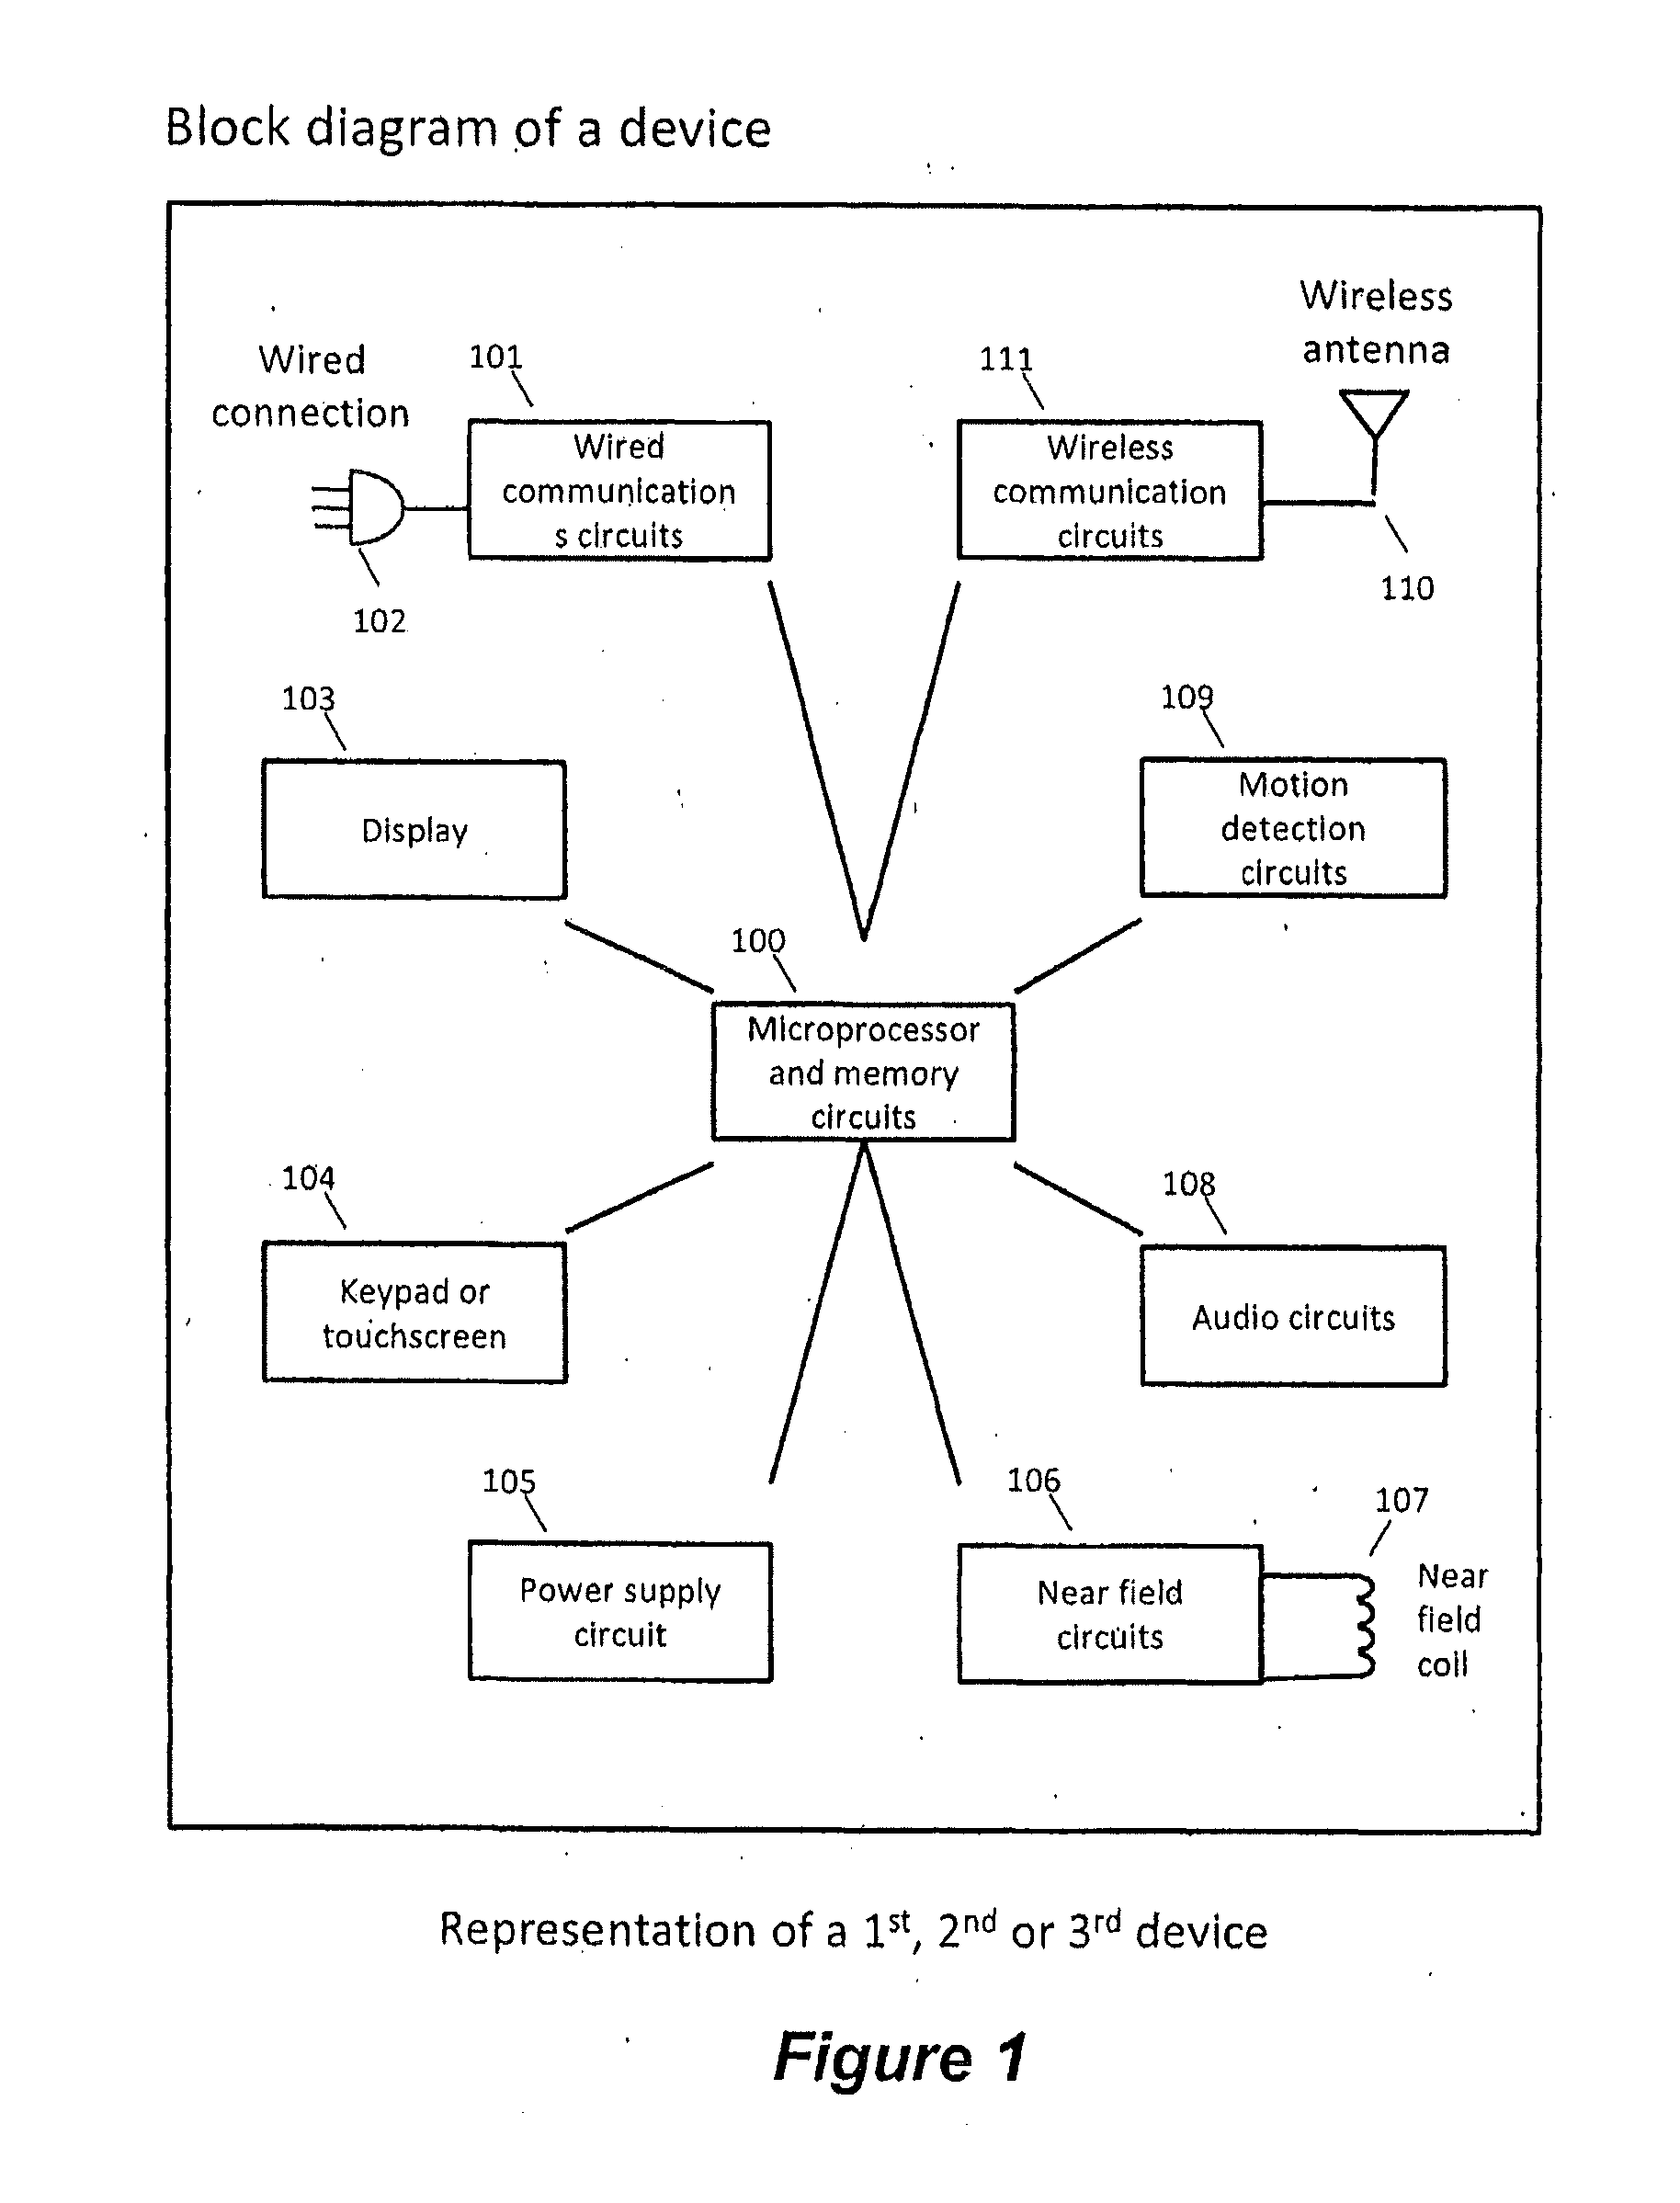 Method and apparatus for forming associations and communicating between devices